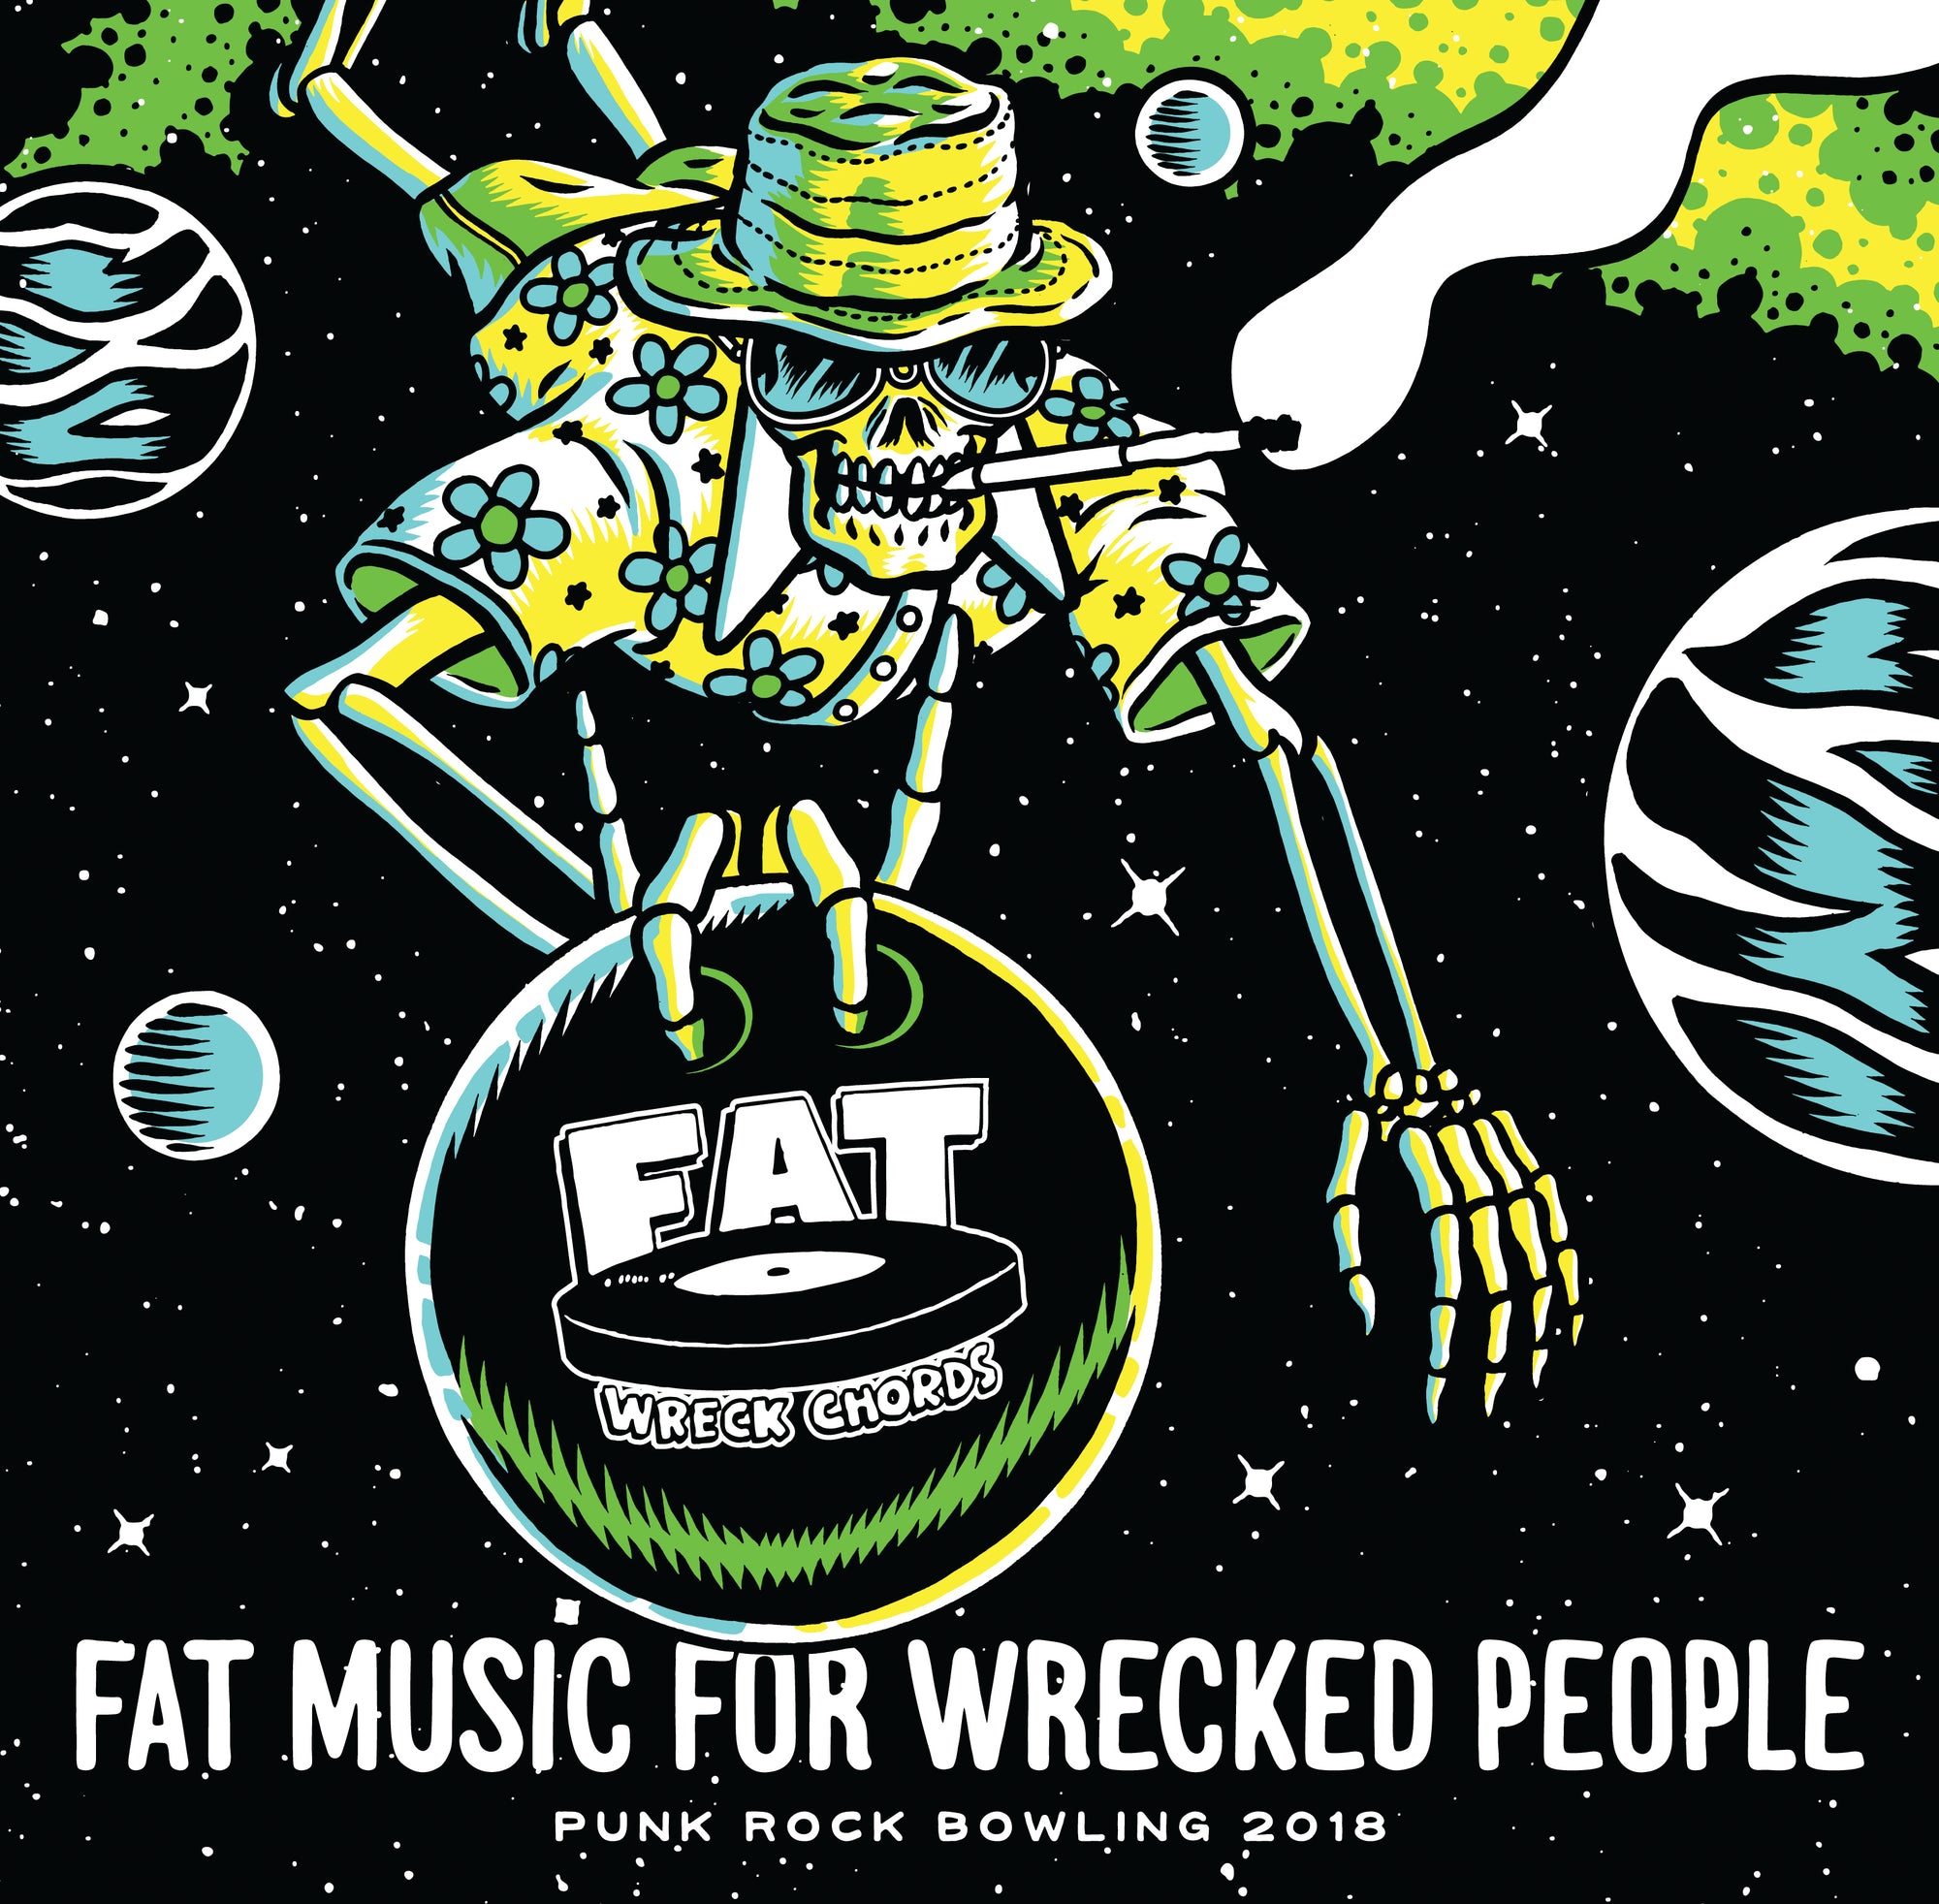 Fat Music For Wrecked People: Punk Rock Bowling 2018